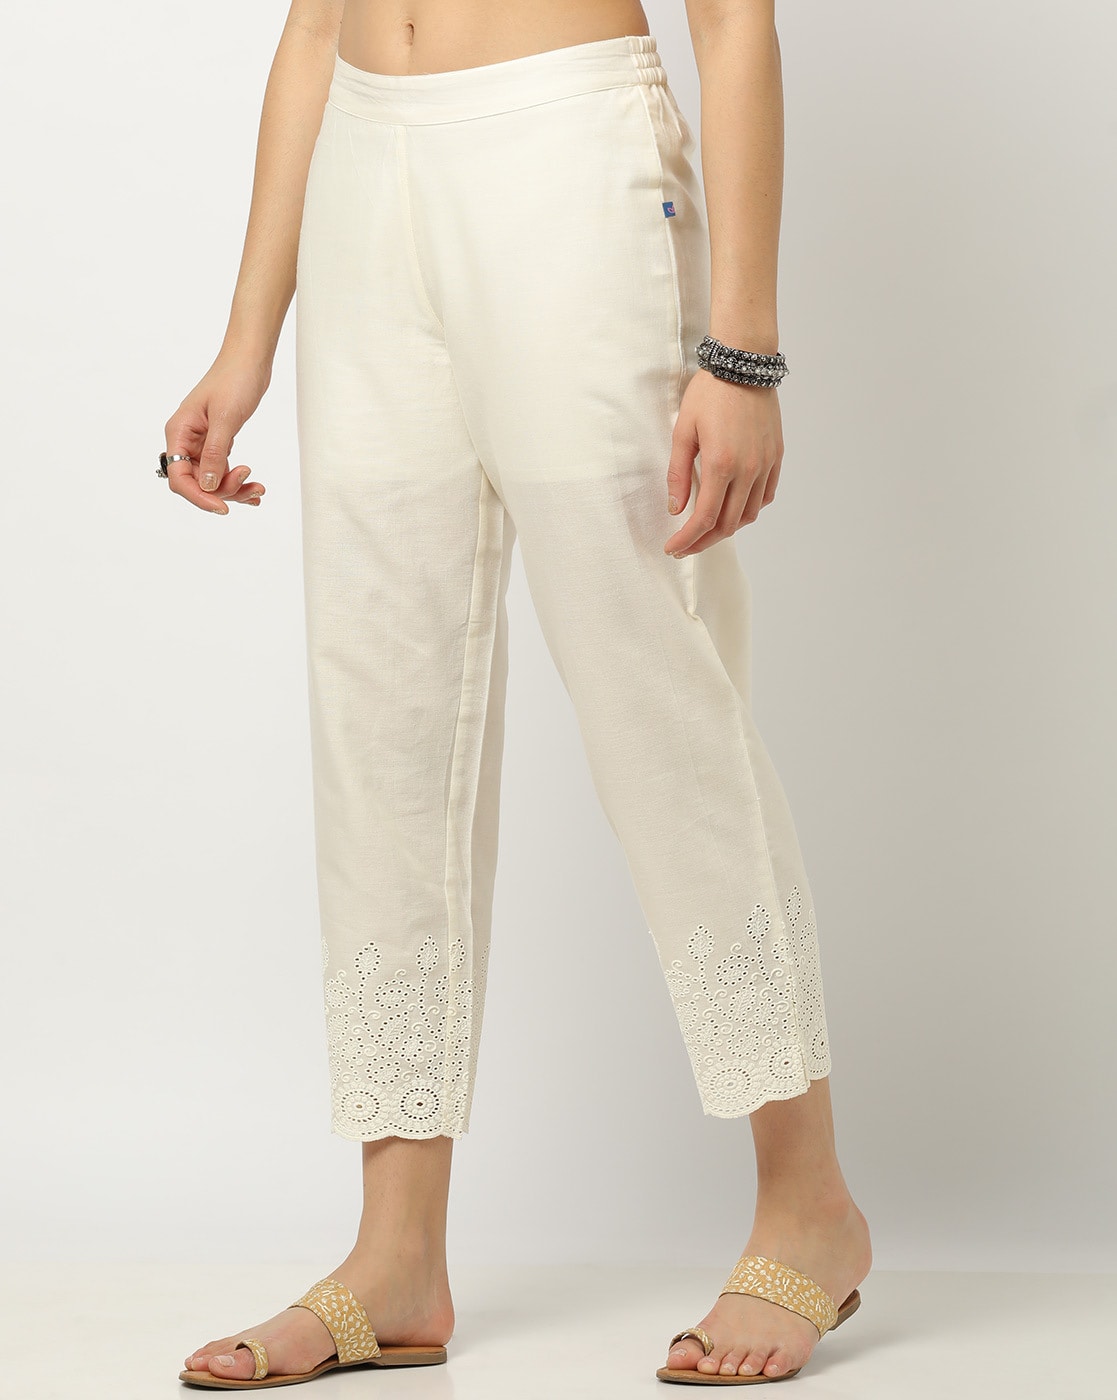 Discover more than 149 white denims online india latest